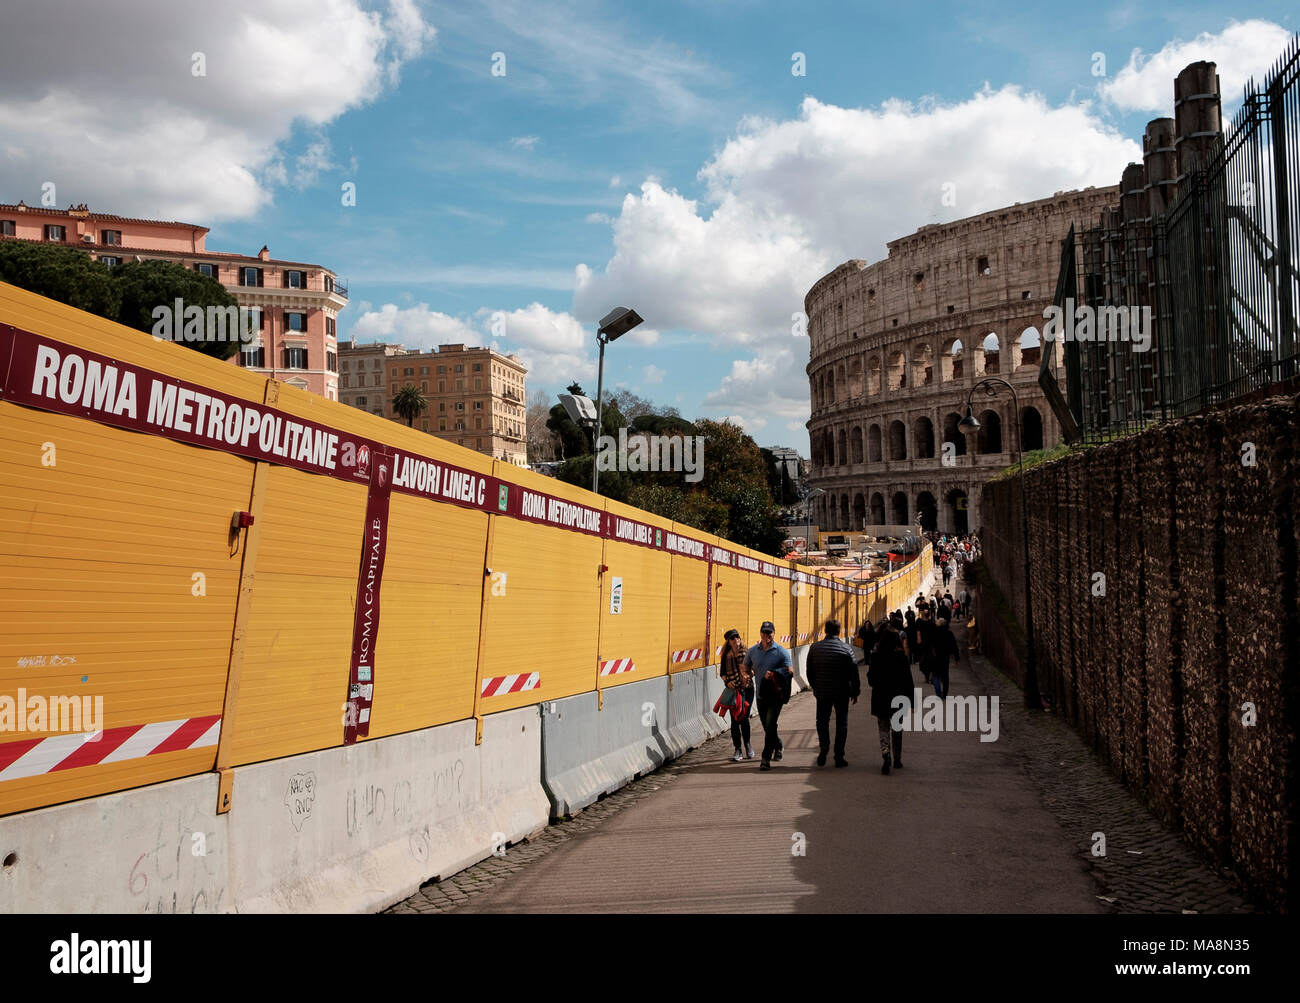 Building Works In The Surroundings Of The Colosseum Rome 2018 In